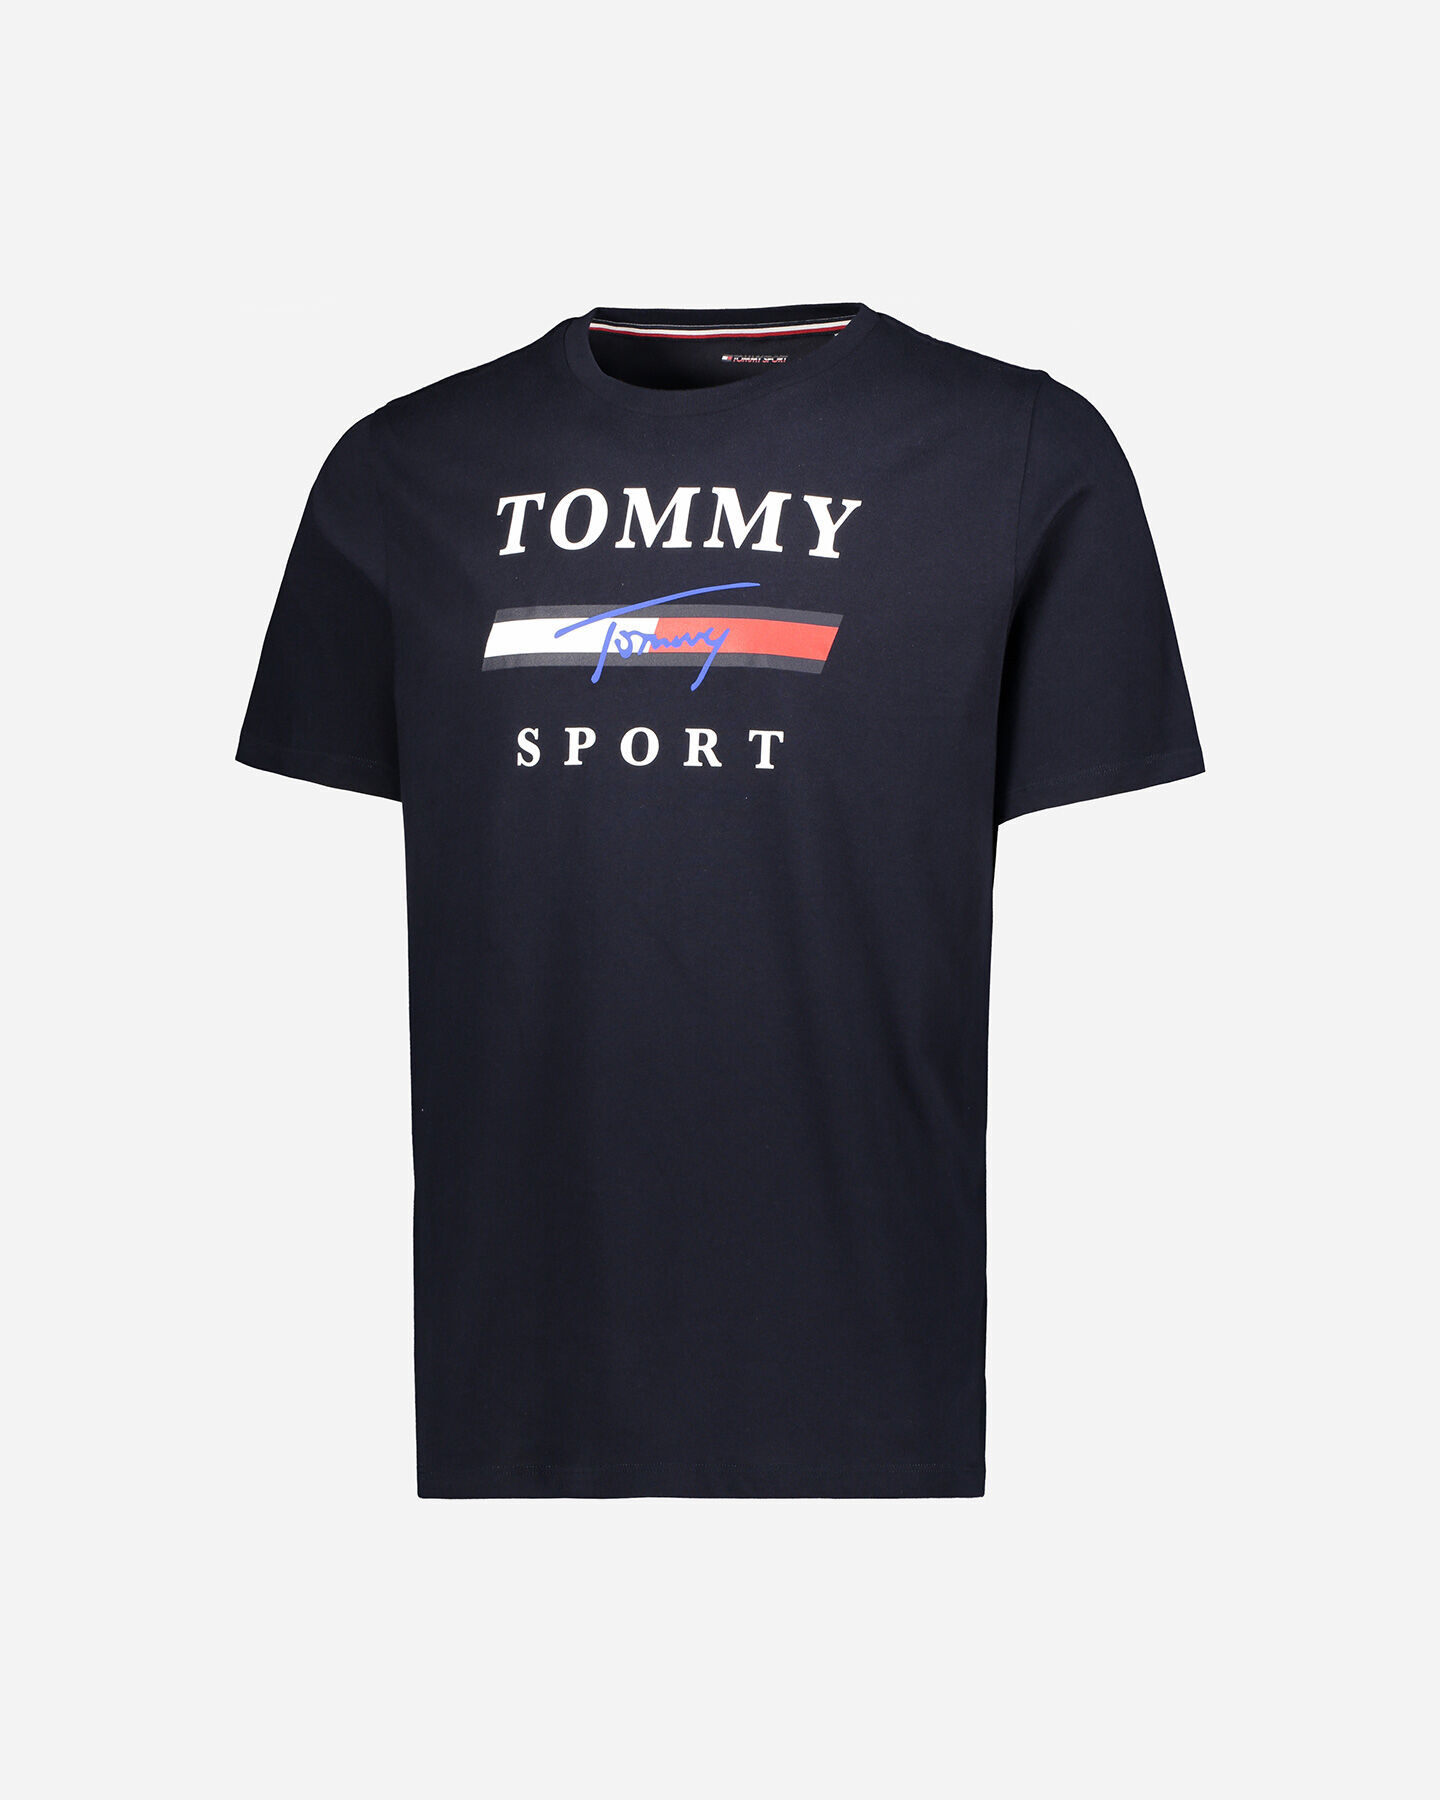  T-Shirt TOMMY HILFIGER GRAPHIC LOGO M S4082460|DW5|SM scatto 5